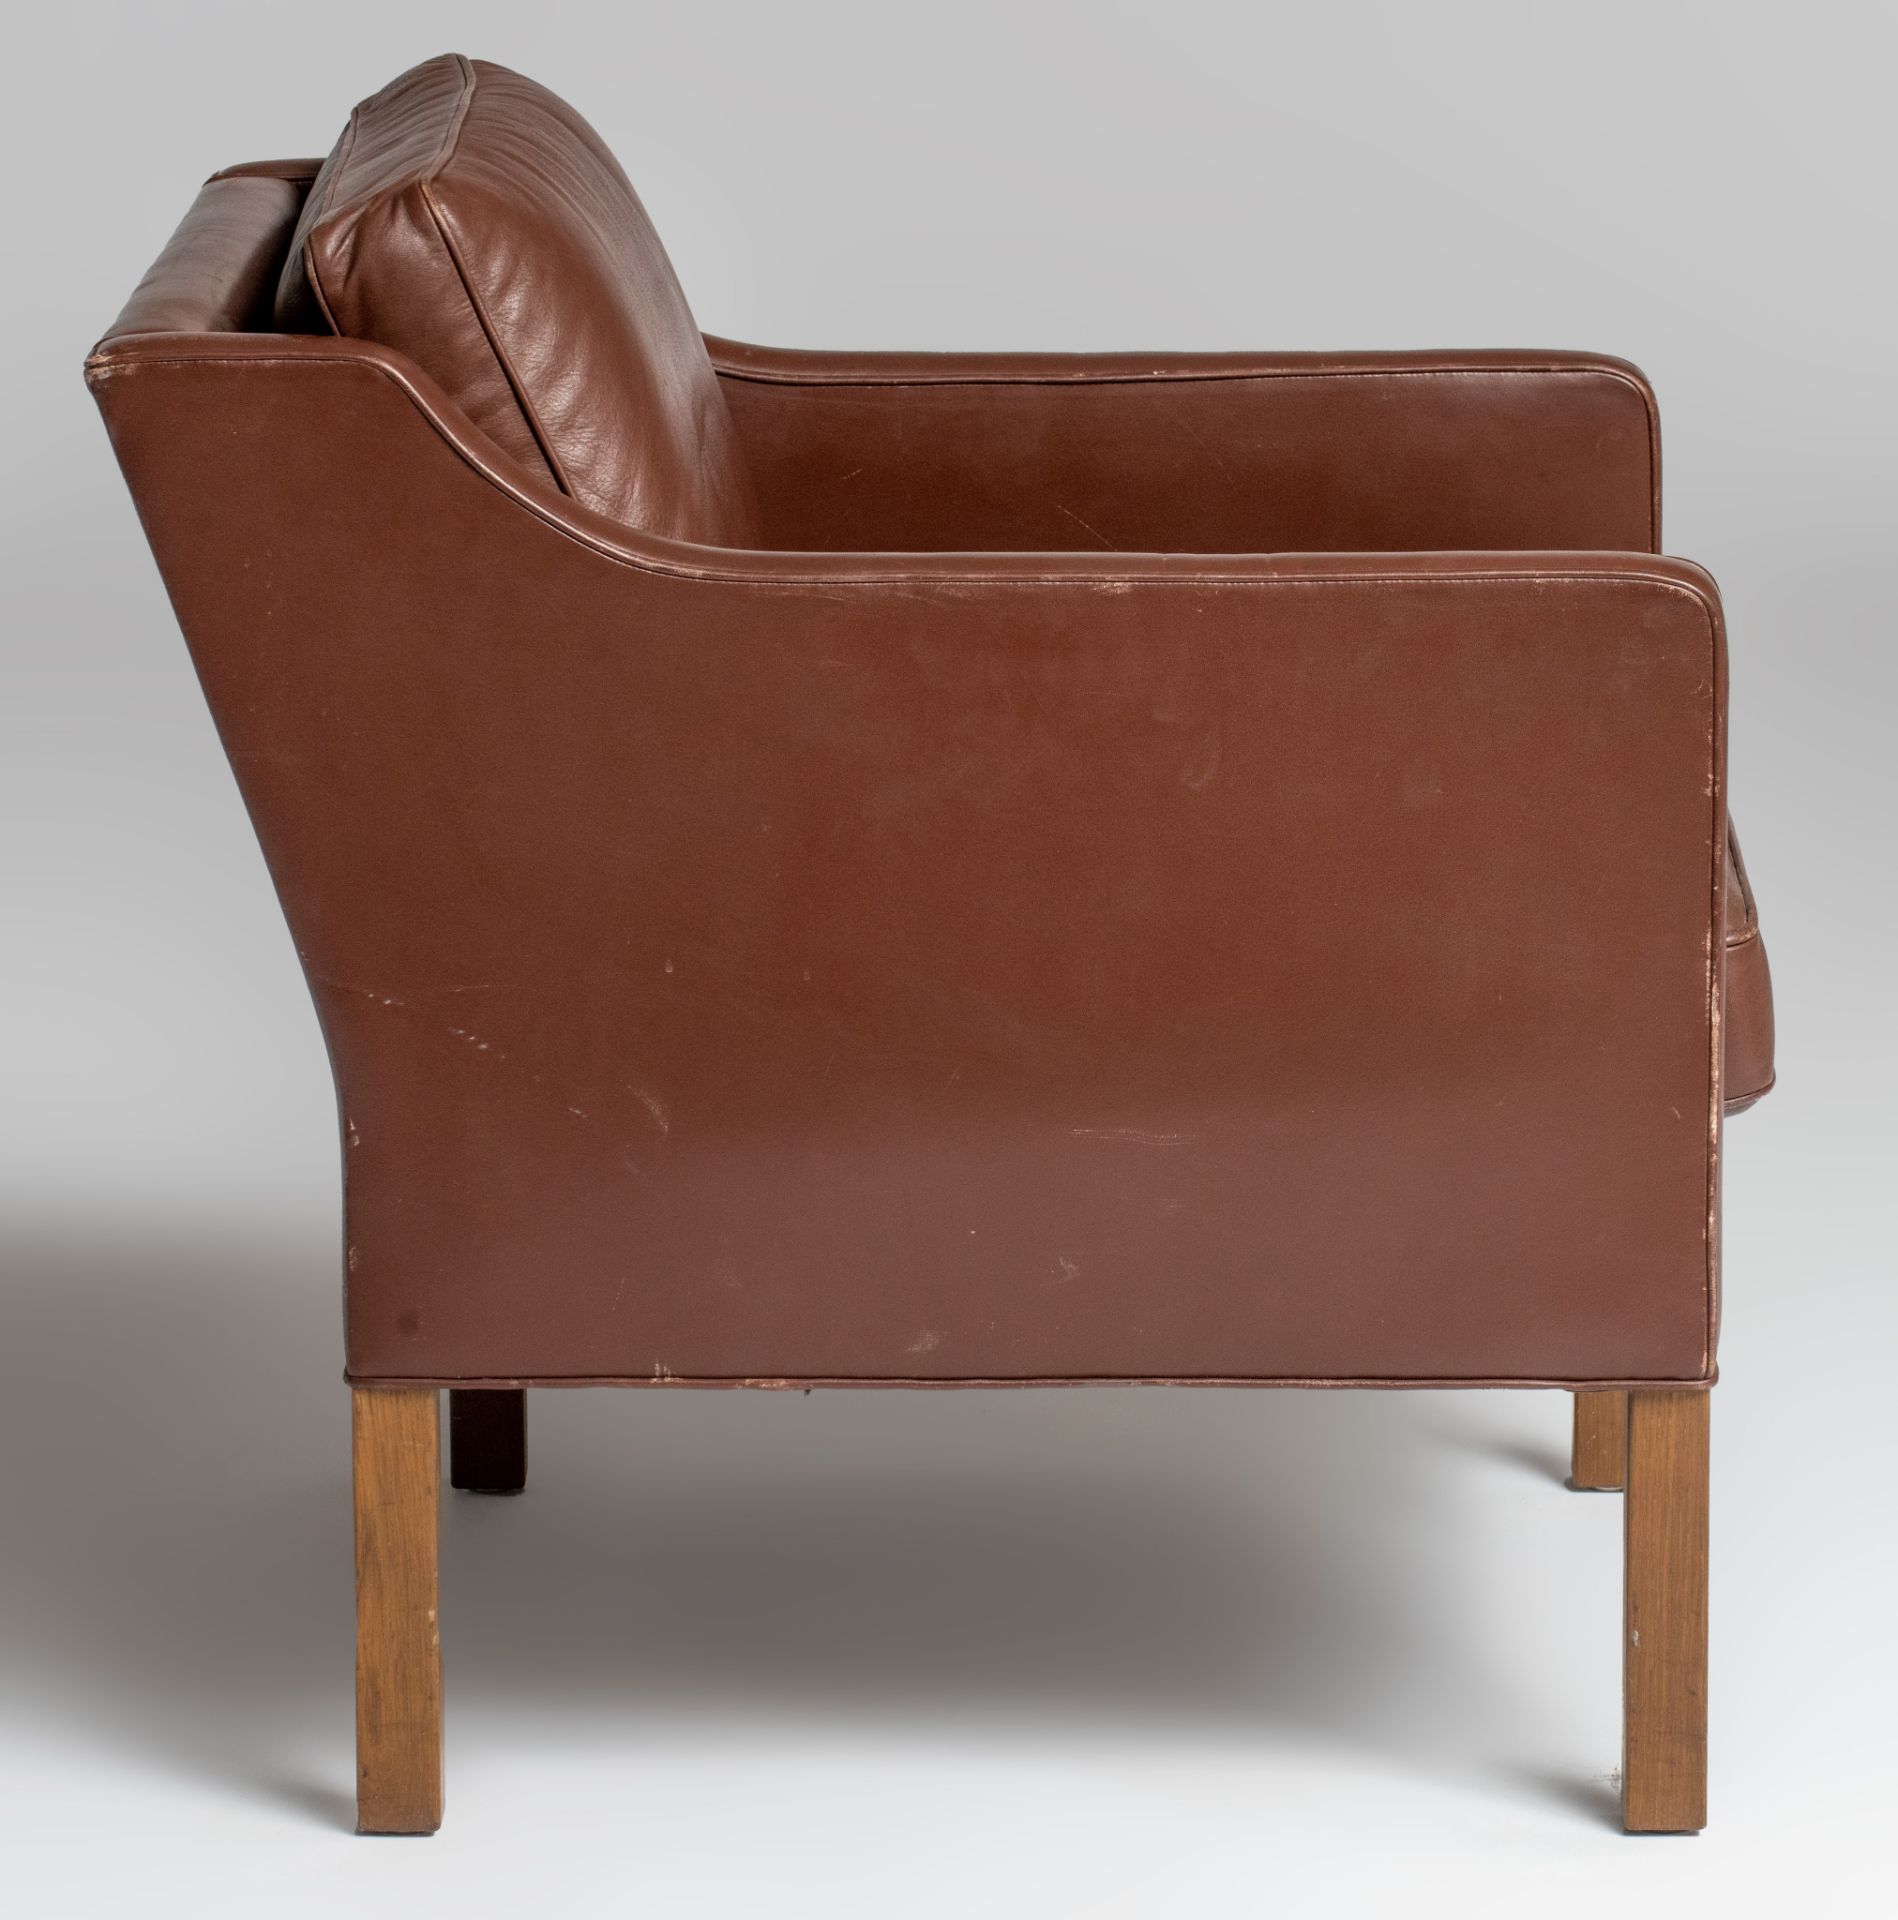 A brown leather armchair by Borge Mogensen for Ed Fredericia Stolefabrik, 1970, H 75 - W 71 cm - Image 7 of 13